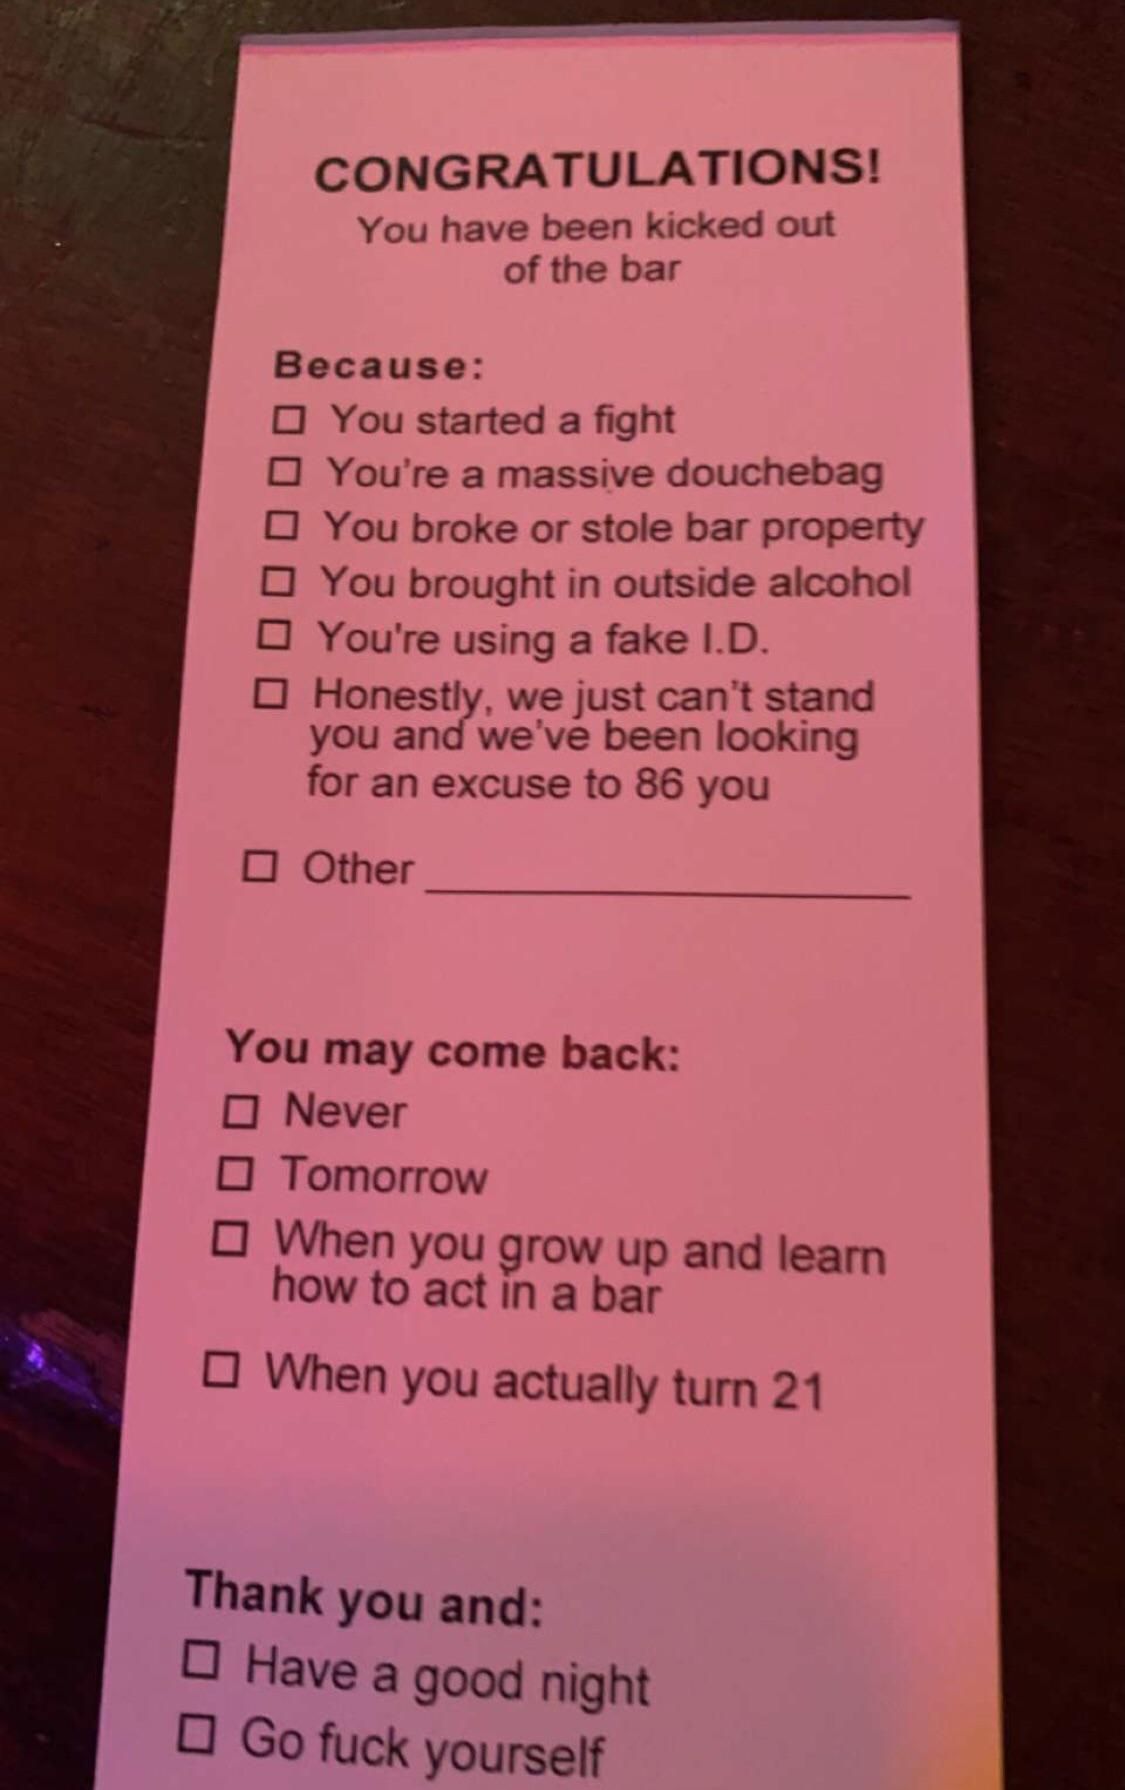 Slip given out at one of my local bars if security kicks someone out.